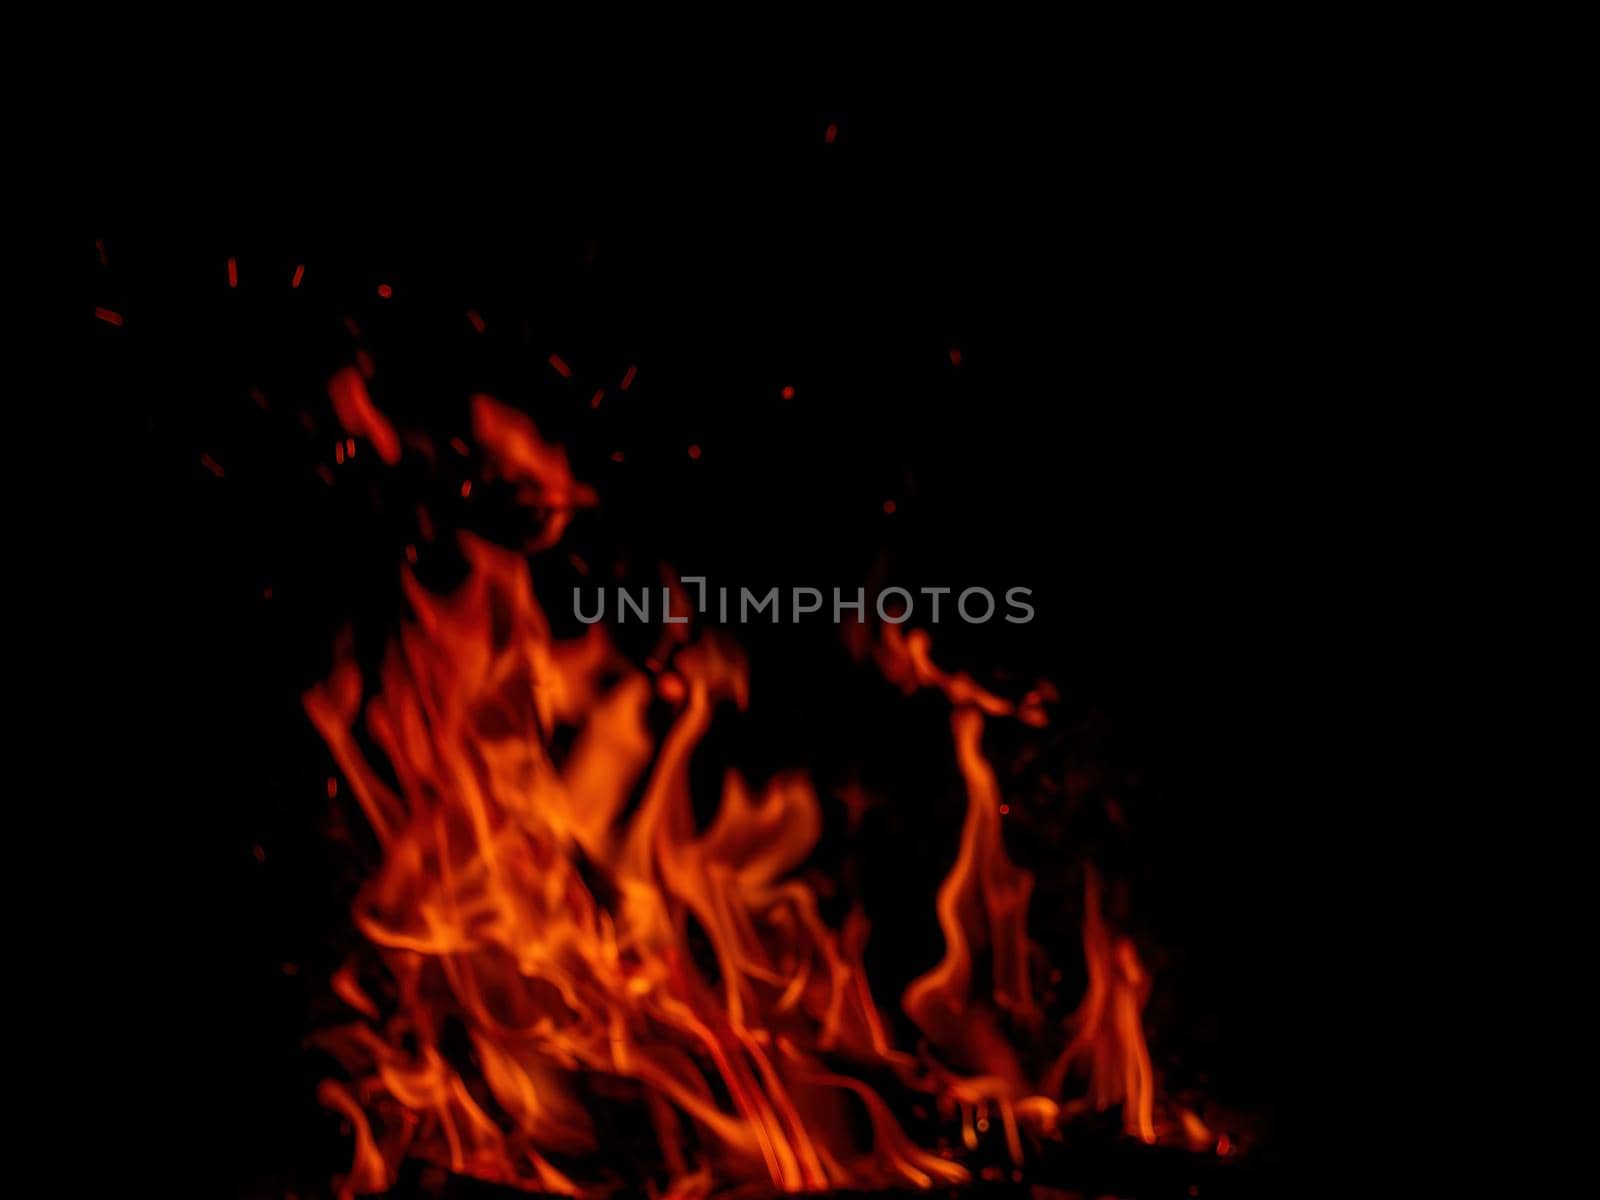 Abstract flame of fire from a campfire on a black background by Andre1ns